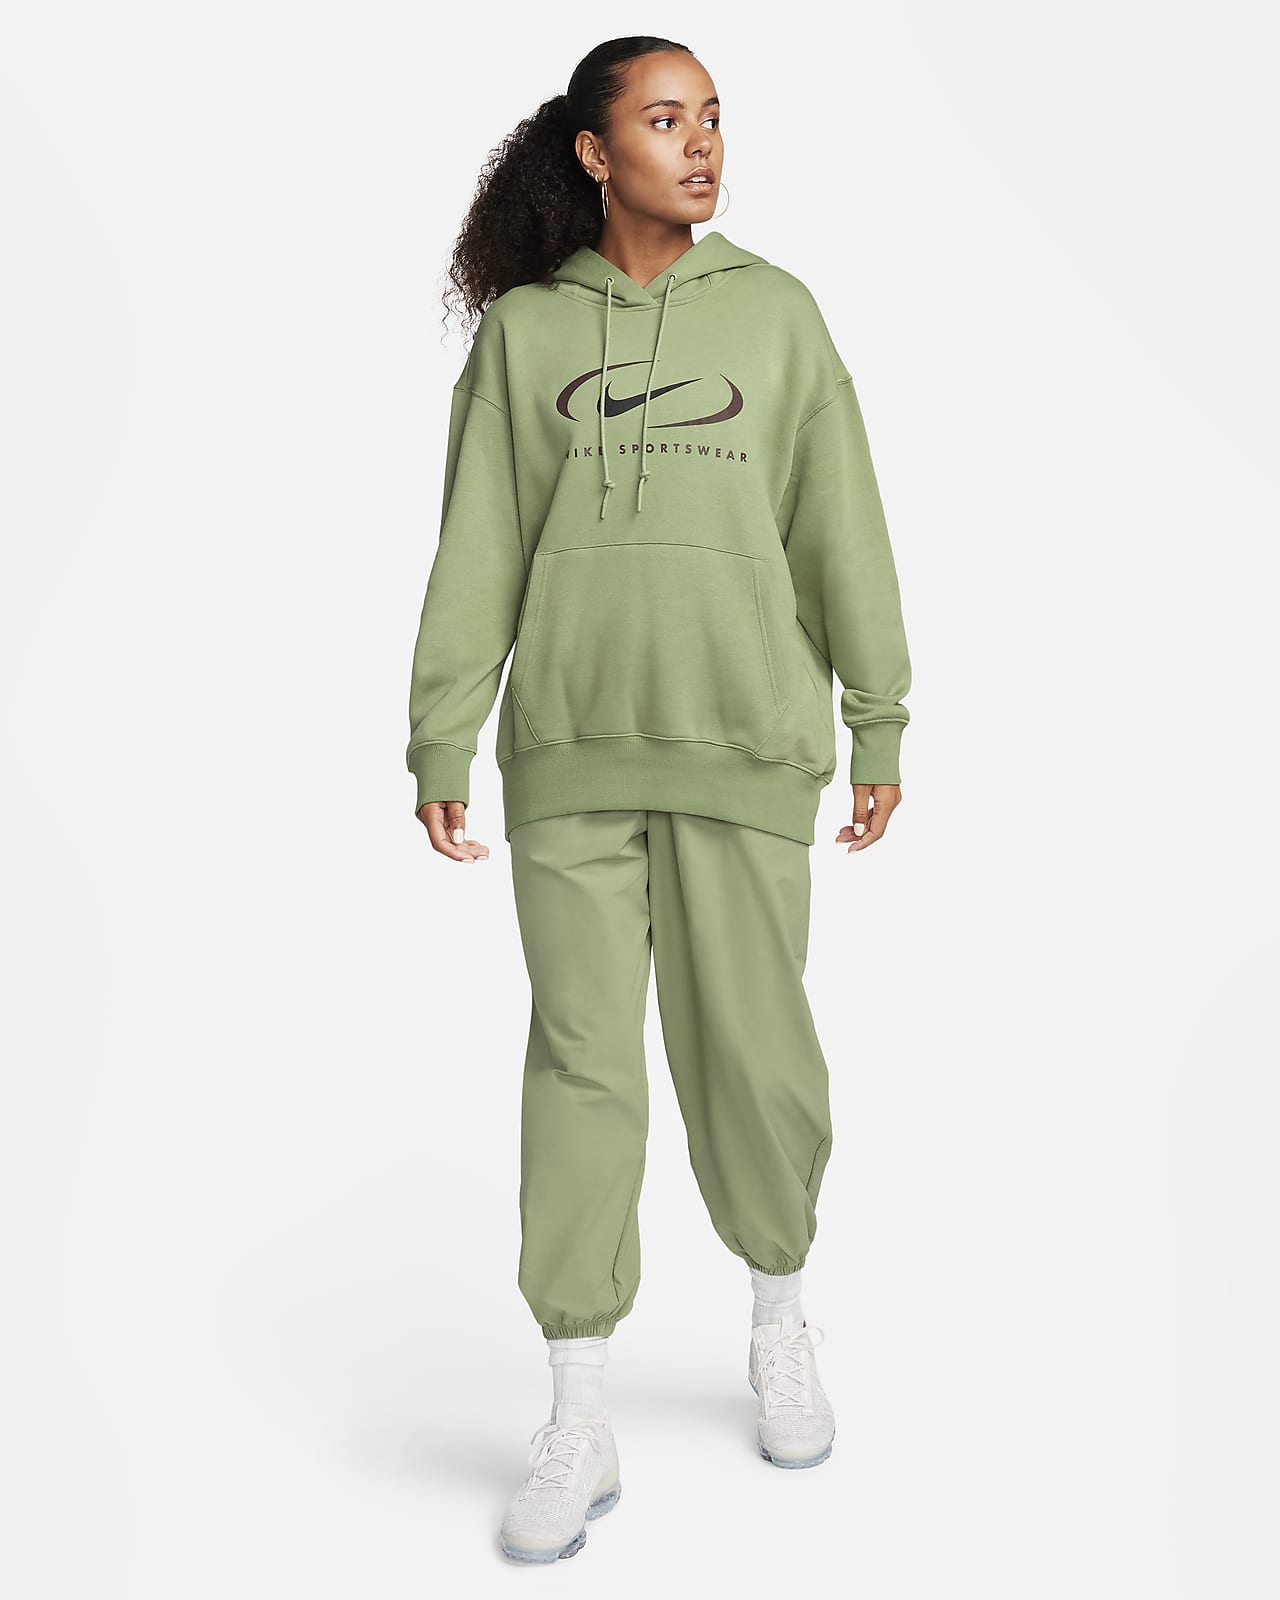 https://static.nike.com/a/images/t_PDP_1280_v1/f_auto,q_auto:eco/0eaaac9c-793e-41c6-b879-54b779346982/sportswear-oversized-fleece-pullover-hoodie-BShqmp.png